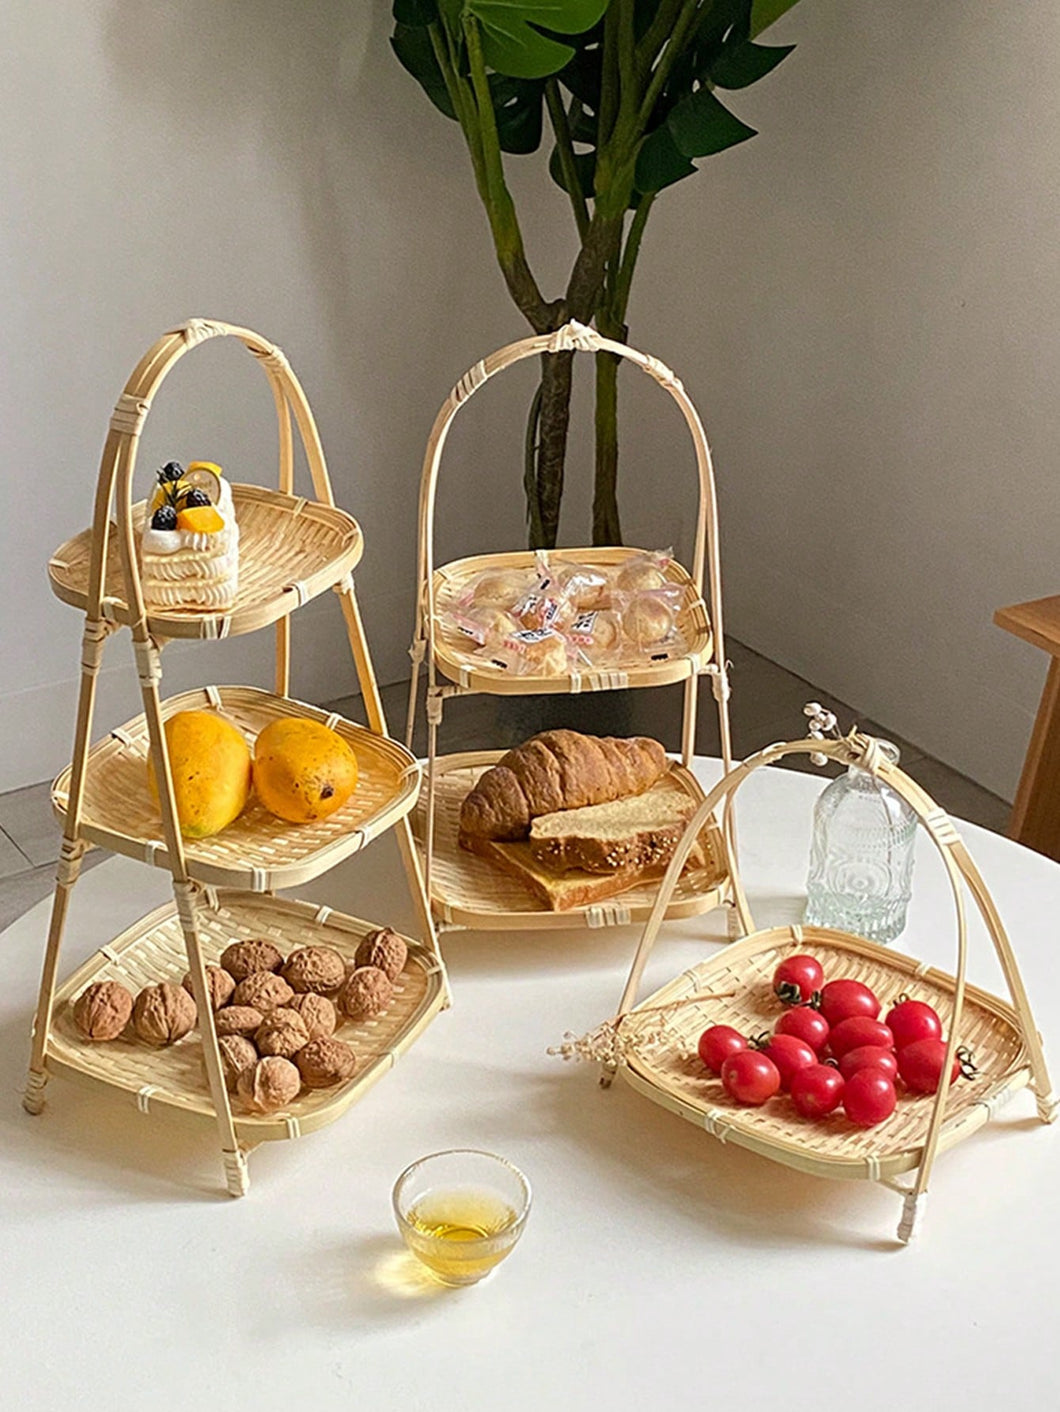 1pc Weaving Baskets Rack Wicker Handwoven Fruit Bread Food Storage Tier Kitchen Decorate Round Square Plate Stand Container Bamboo Baskets Straw Weaving 1/2/3 Layer